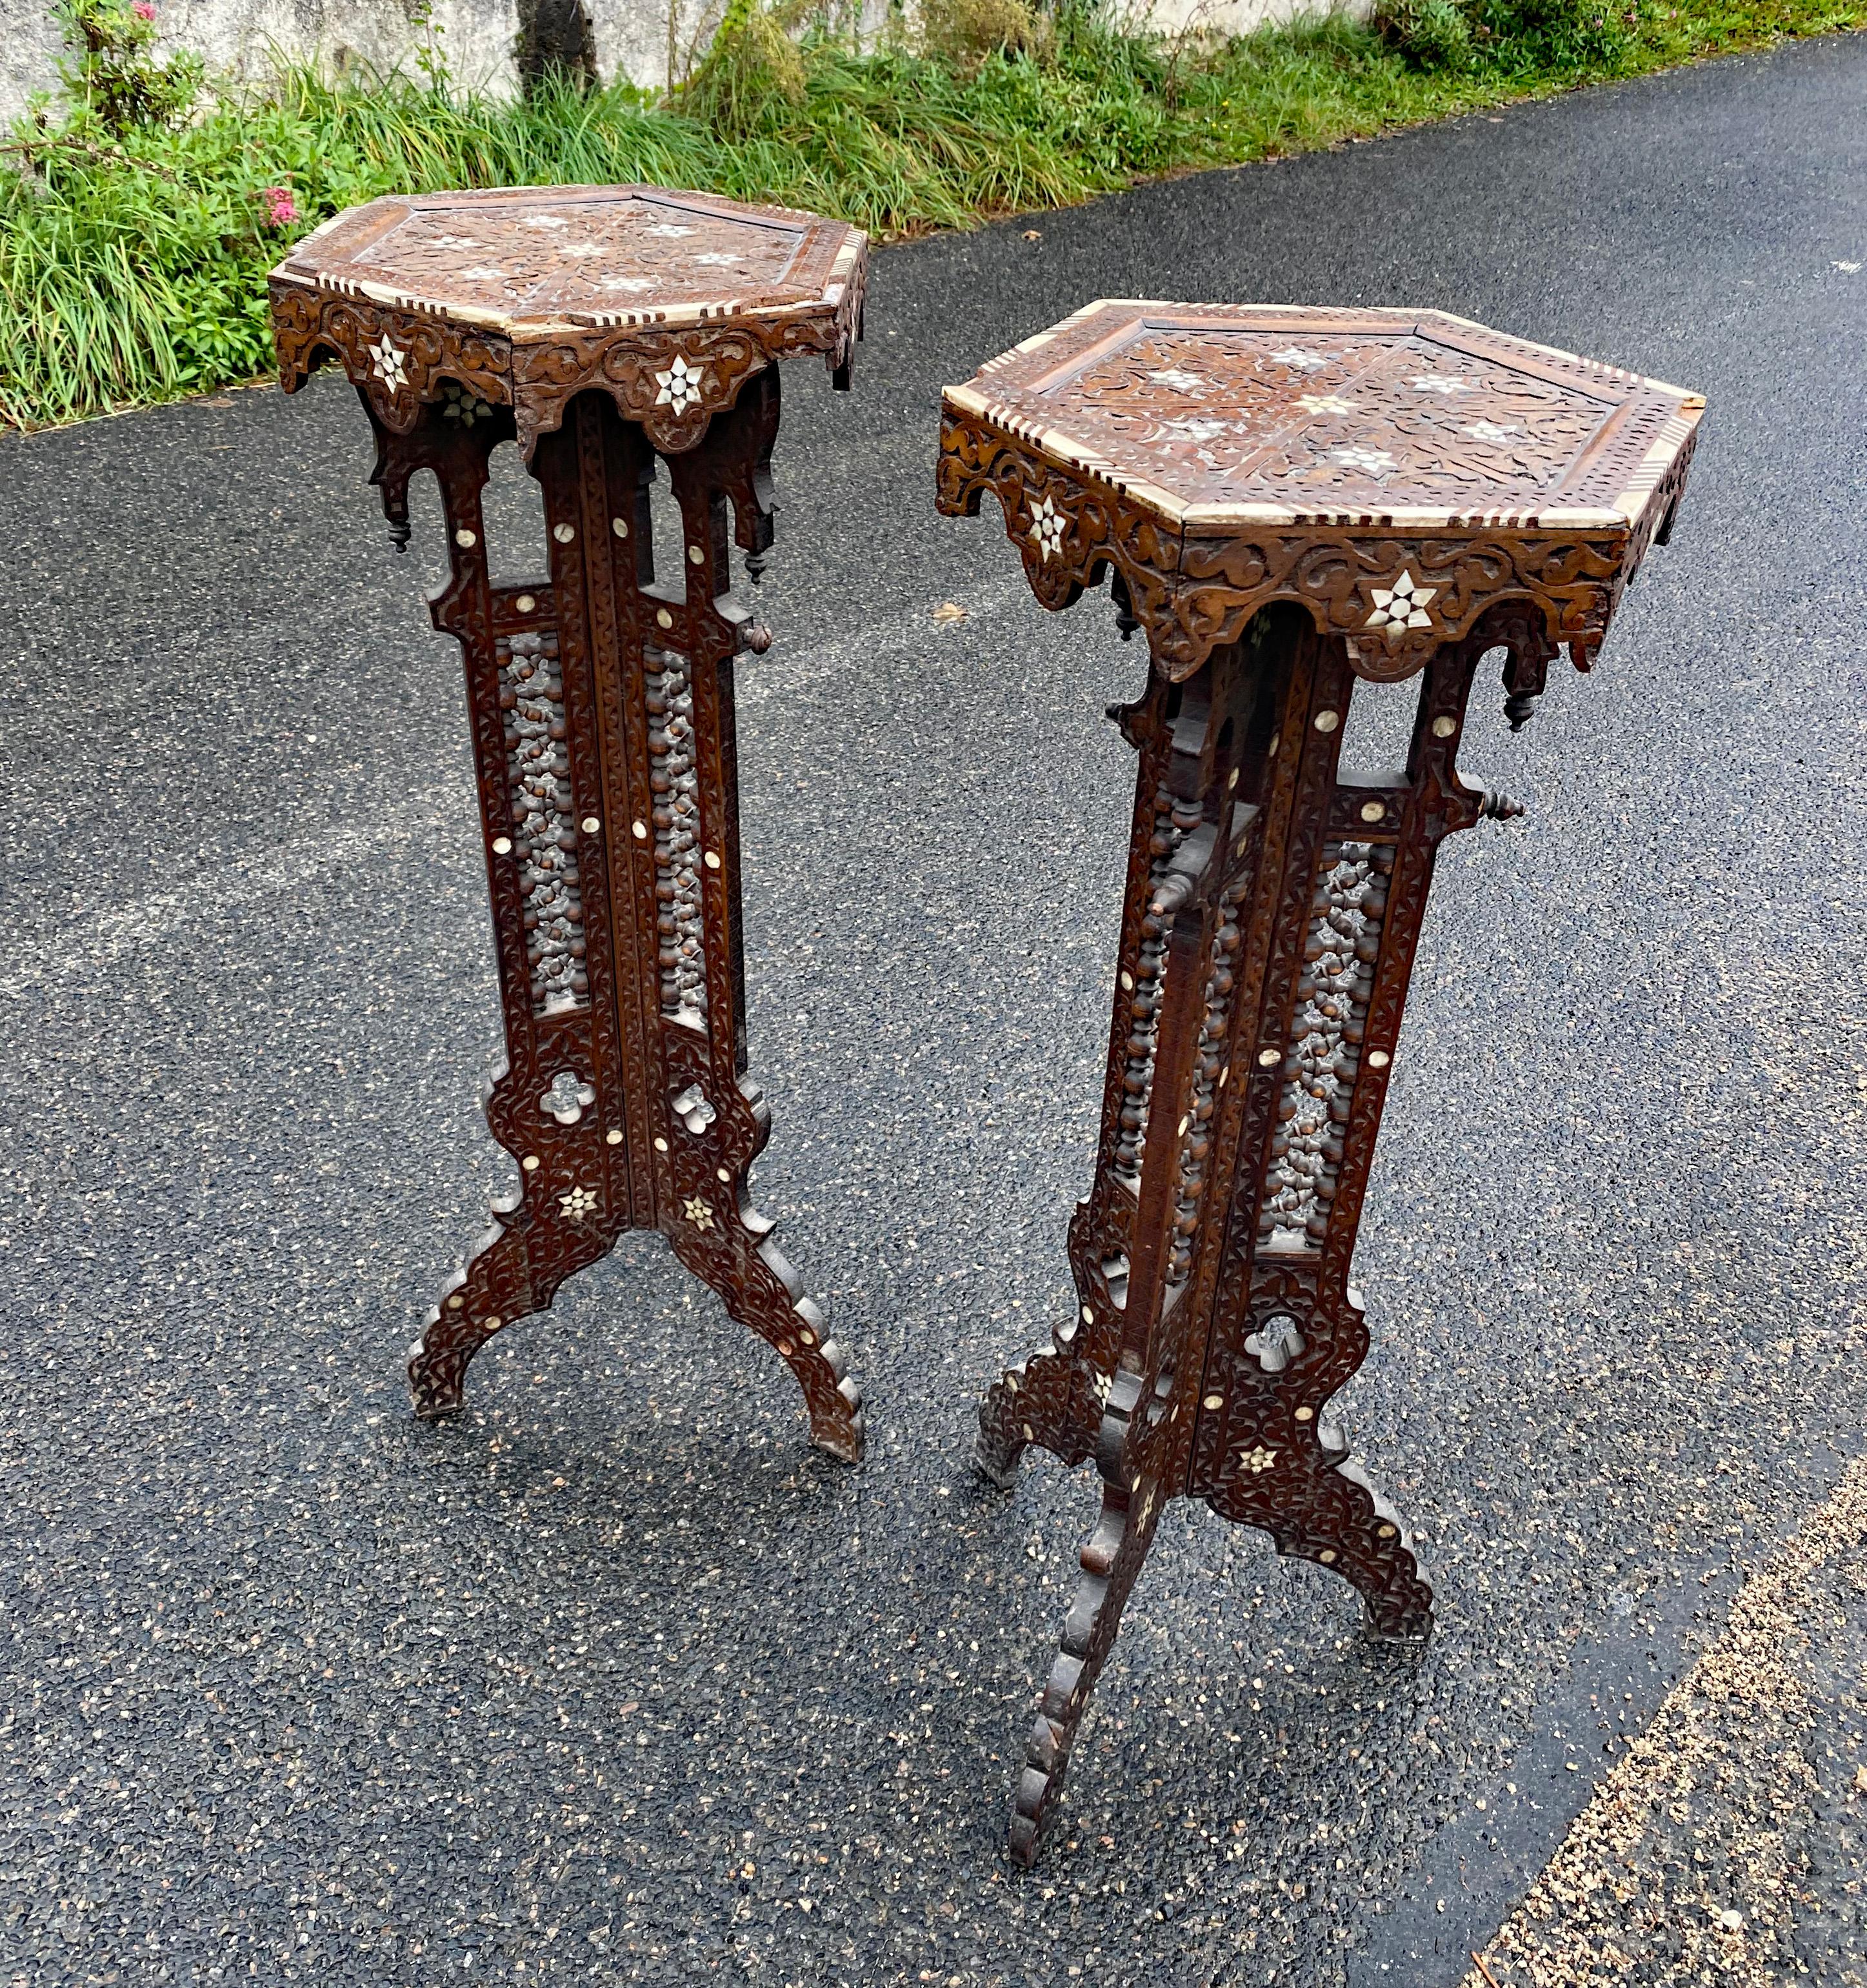 Bone ancient oriental work, pair of carved wooden pedestals, bone and mother-of-pearl For Sale